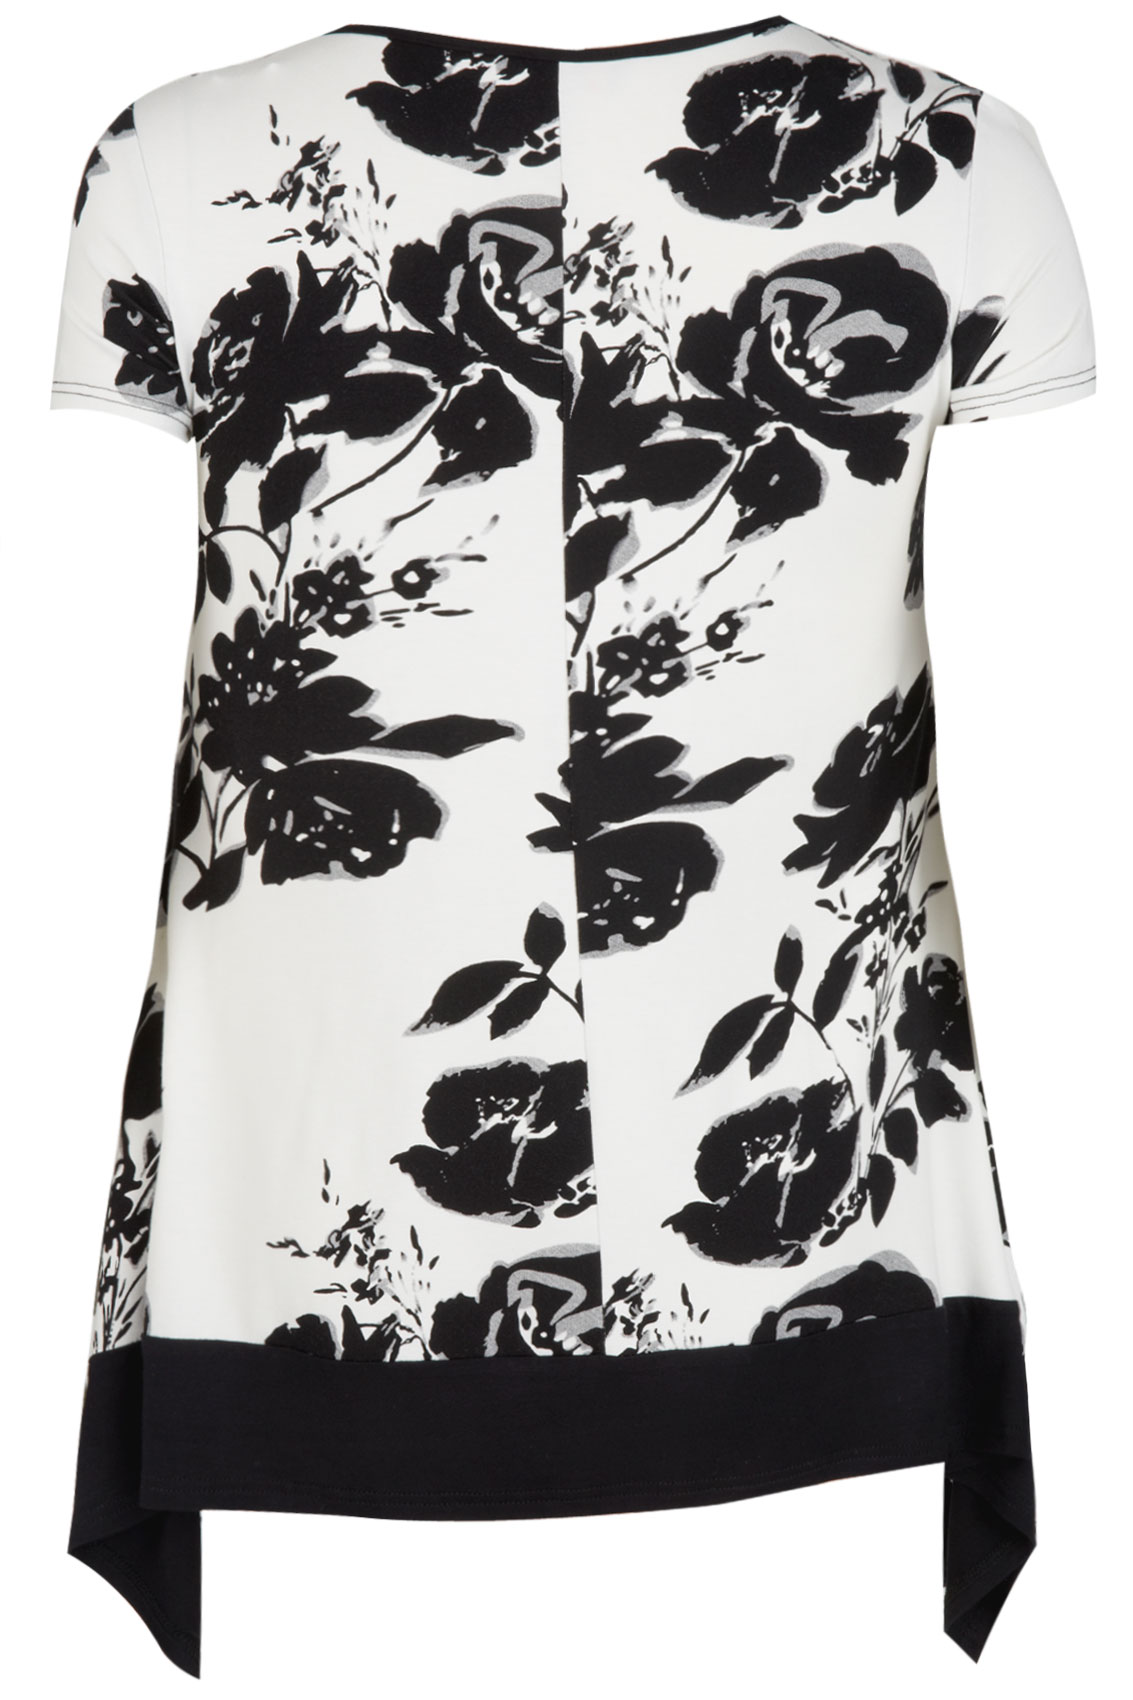 Black & White Floral Print Longline Top With Hanky Hem Plus Size 16 to 32